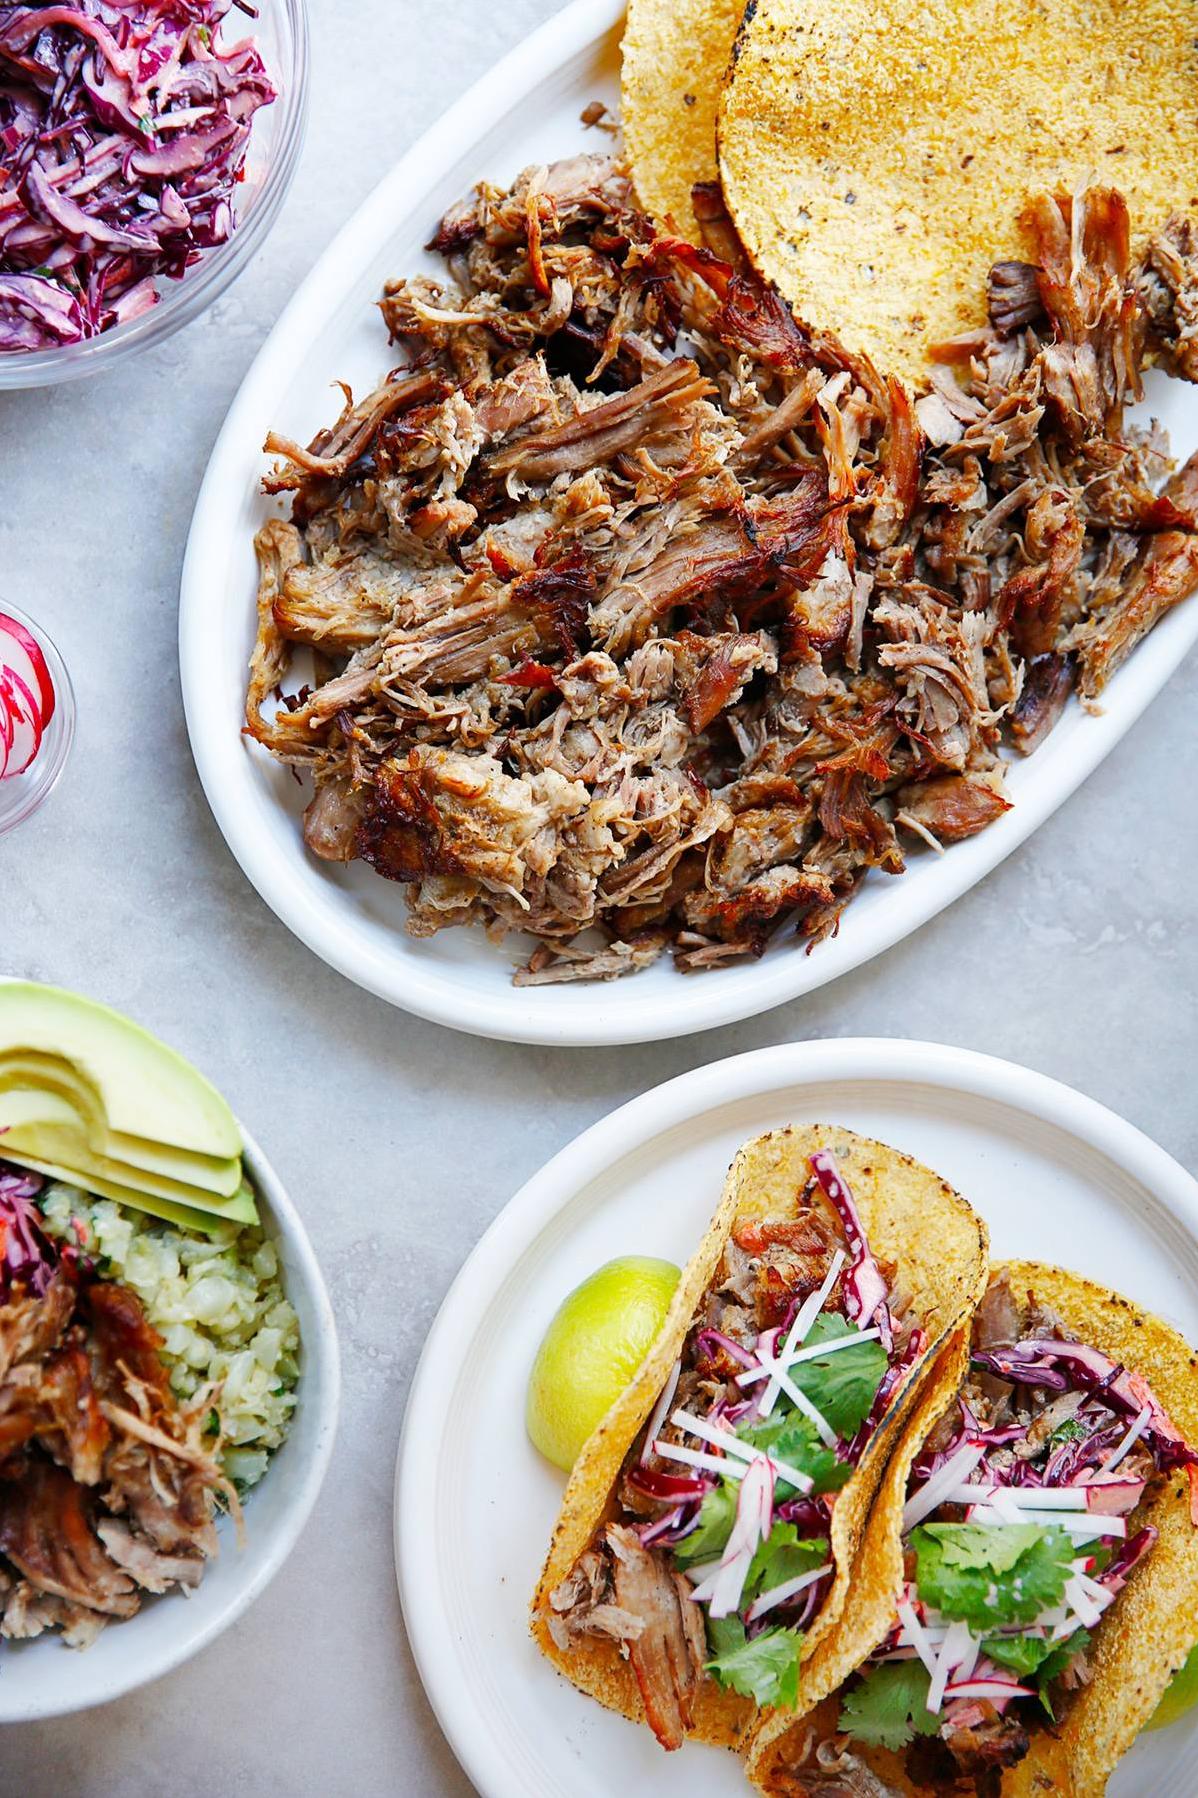  These carnitas are a perfect balance of crispy and tender, with just the right amount of spice to keep things interesting.